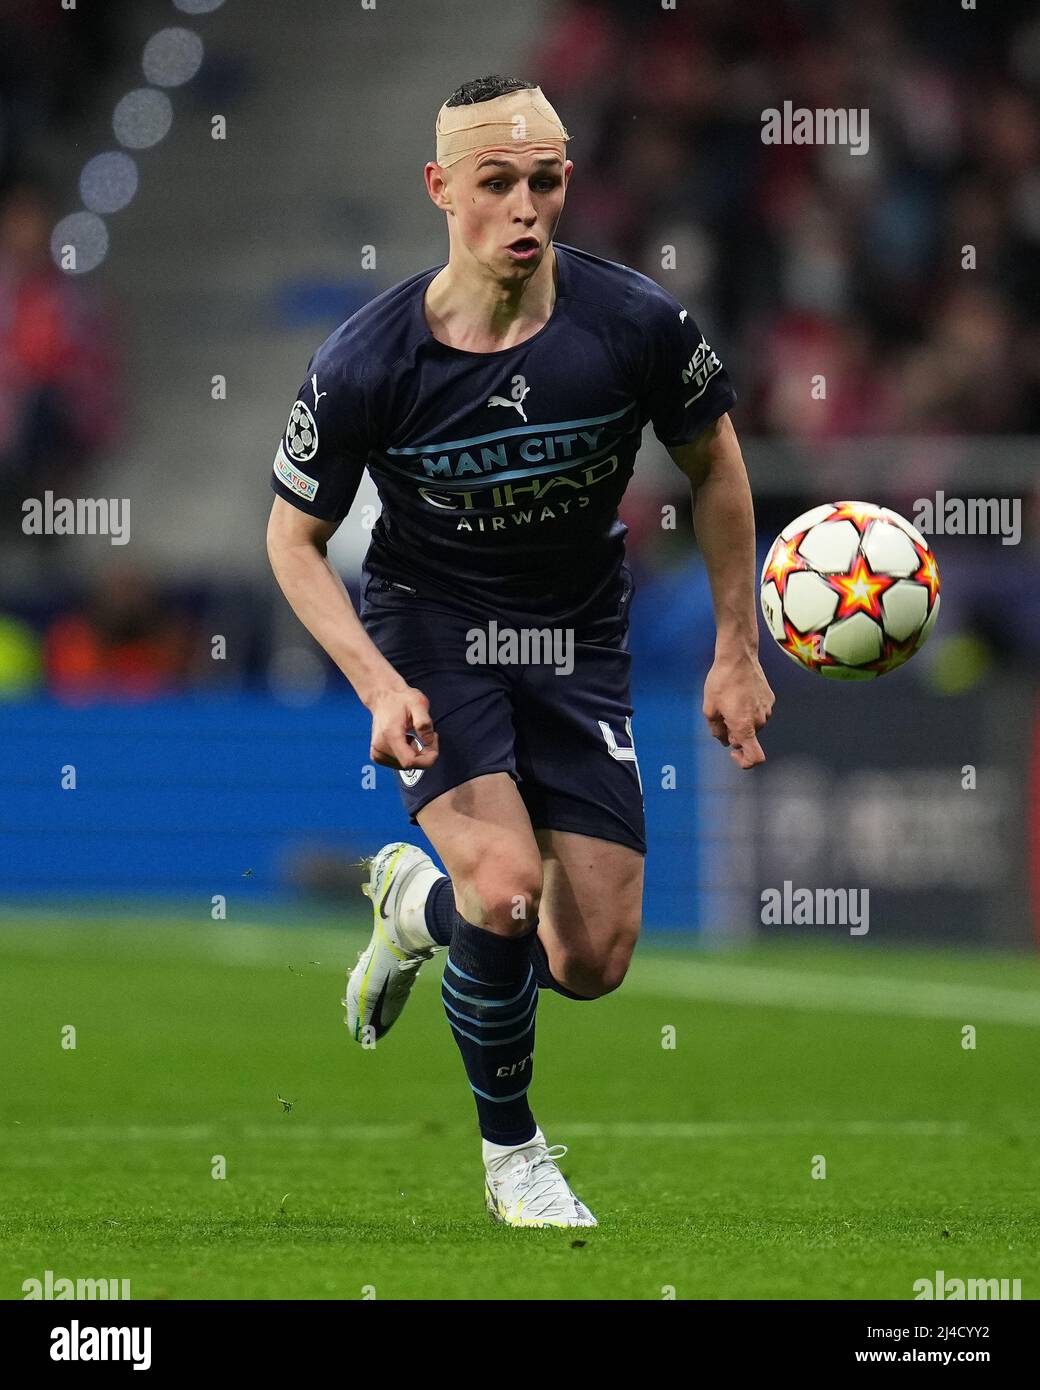 HOT MANCHESTER CITY PLAYER PHIL FODEN'